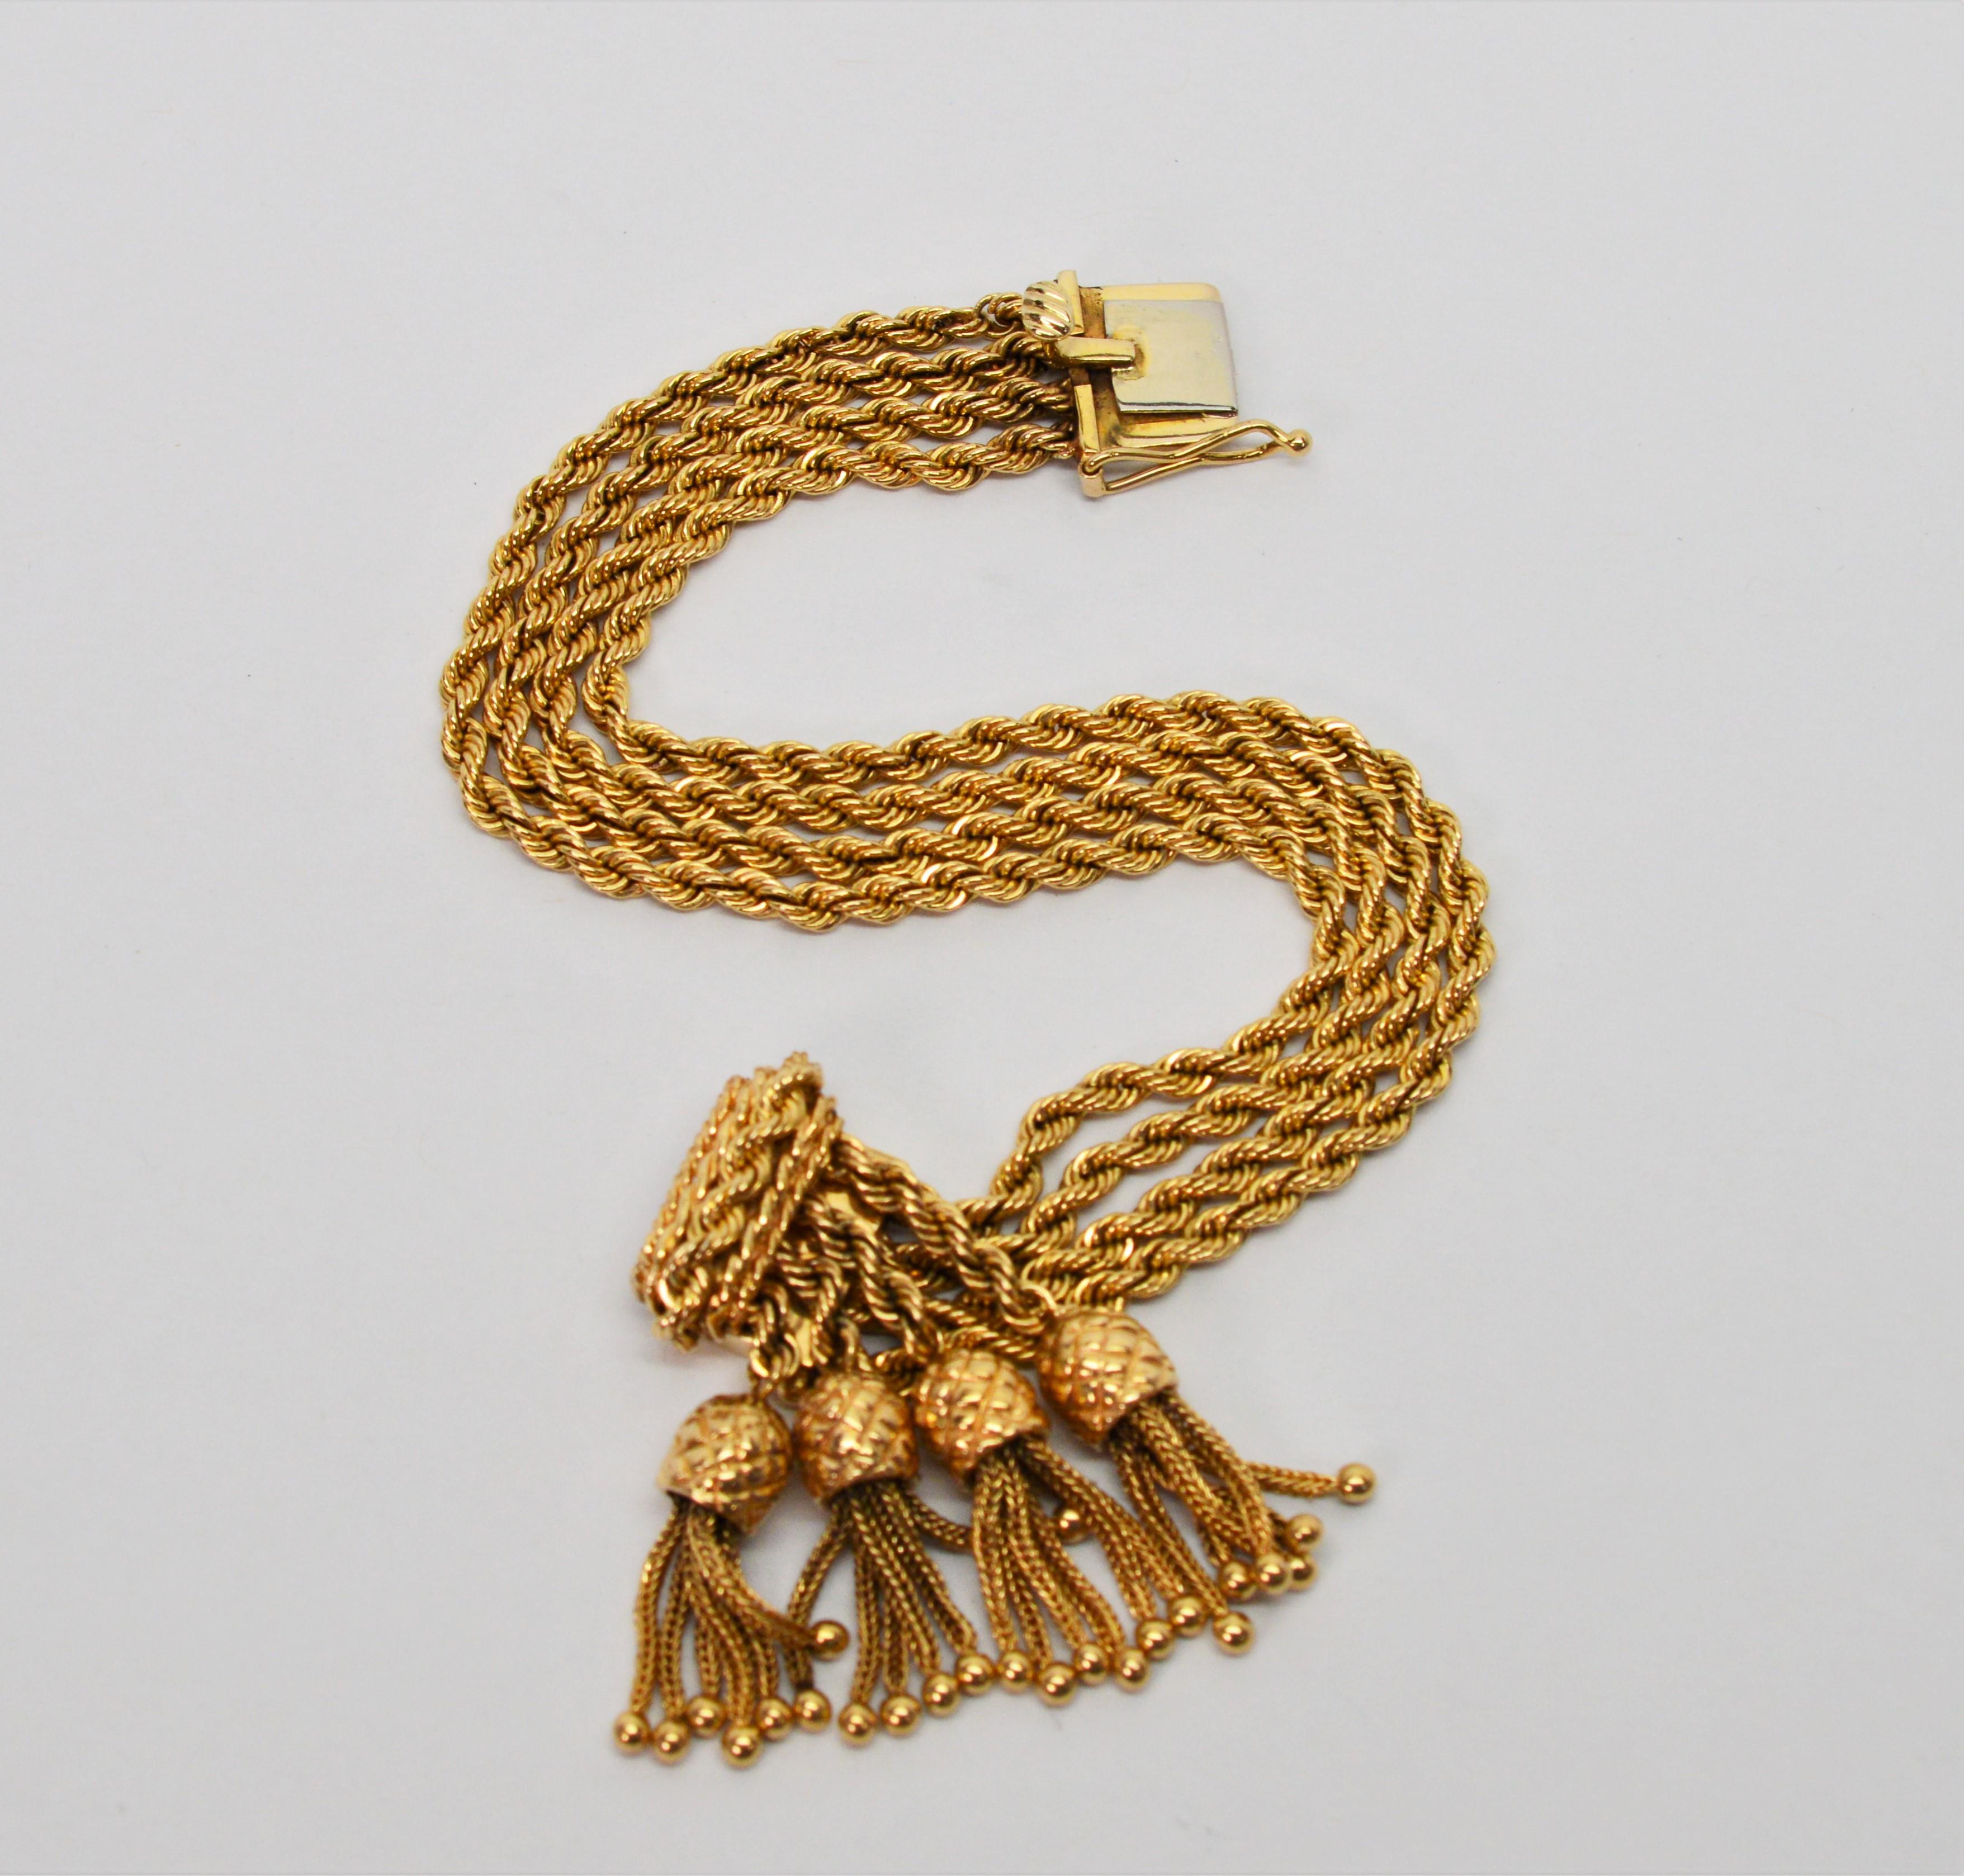 Movement and design are the strength of this piece. All in fourteen carat 14K yellow gold, this unique 6-7/8 inch bracelet is crafted with four lengths of glistening rope chain that give fluid body to the one half inch wide piece. The ornate box